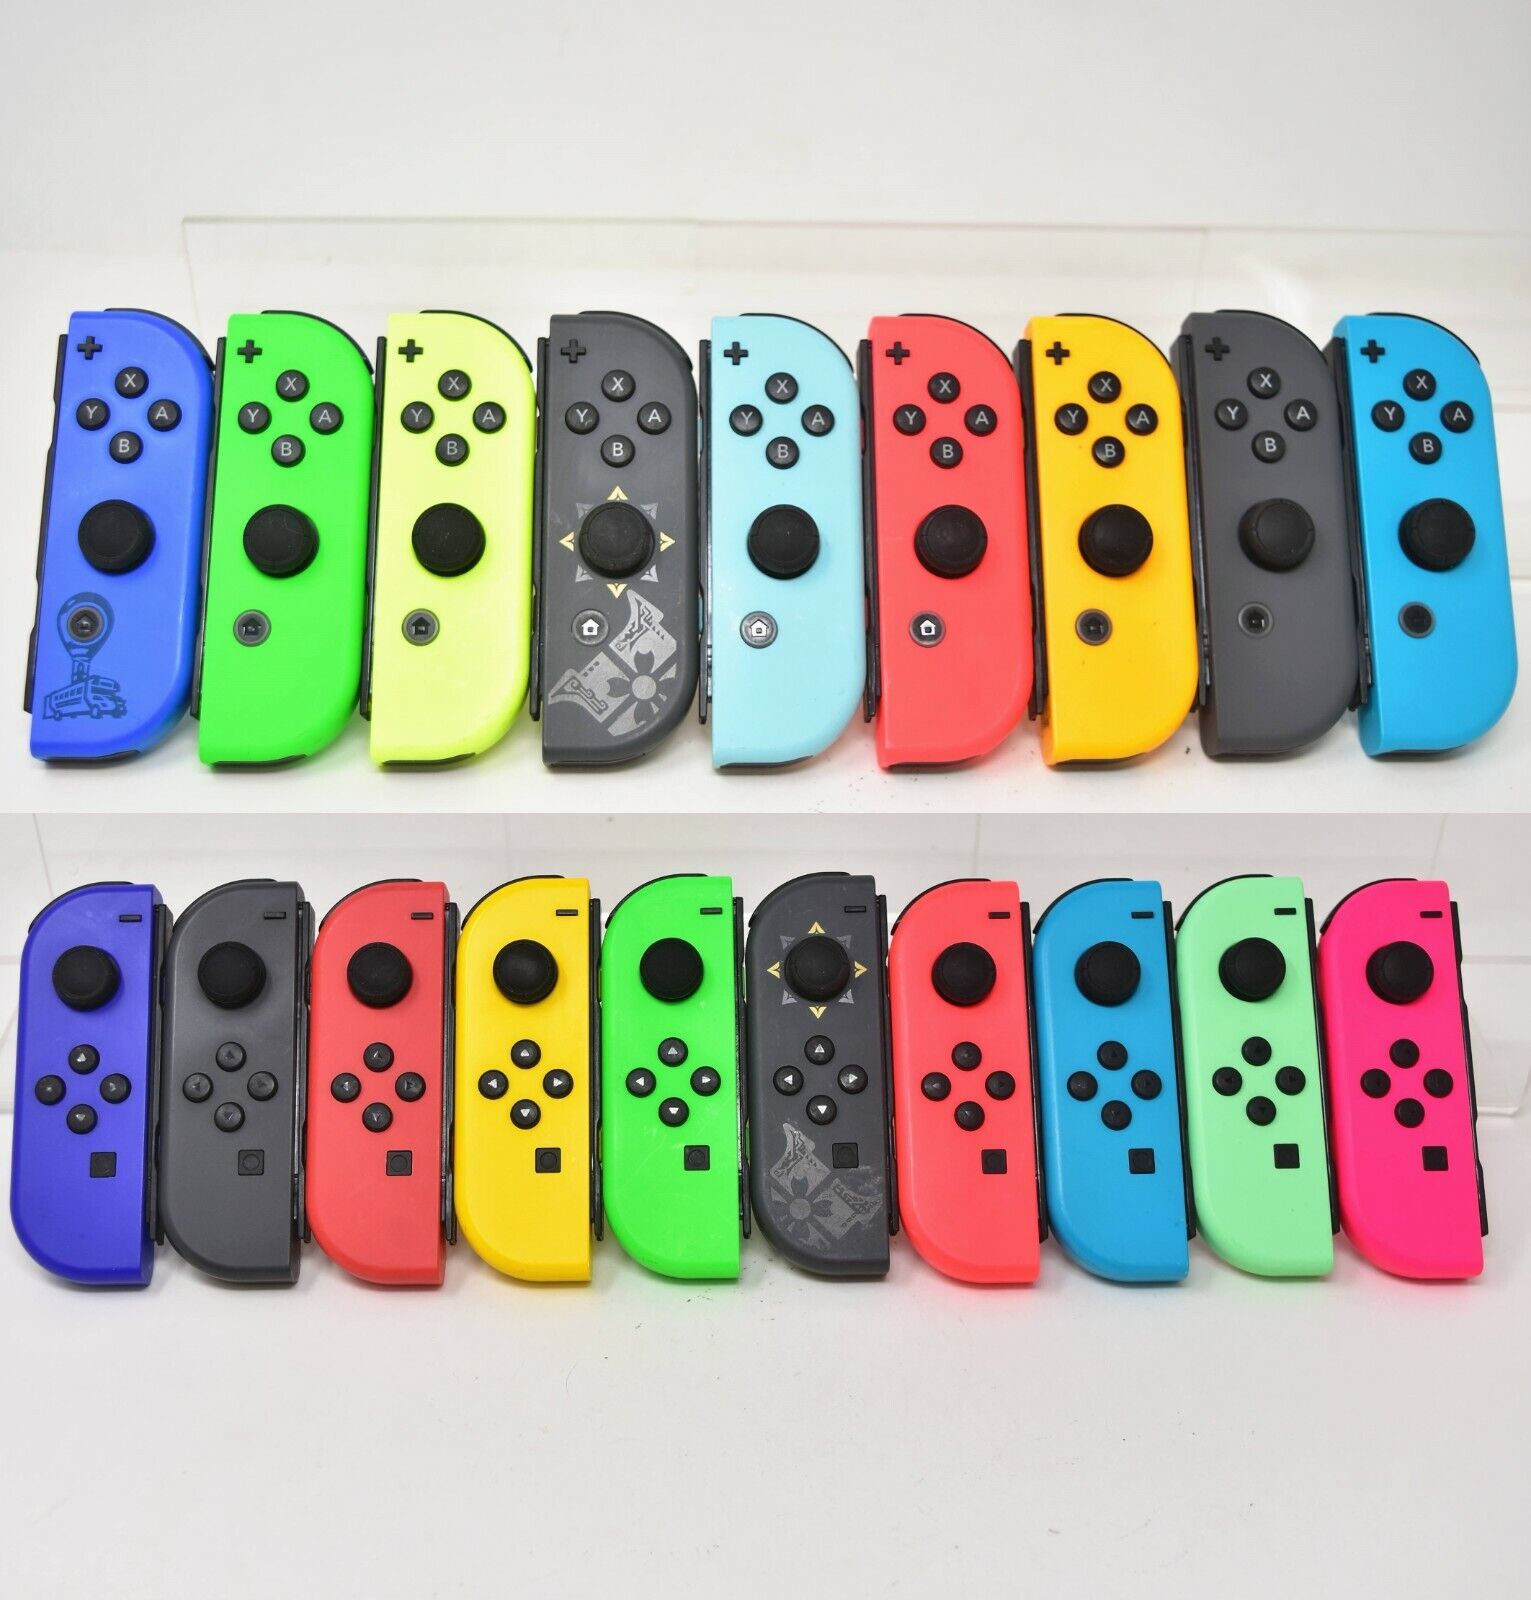 Is your Nintendo Joy-Con controller defective? This lawsuit may